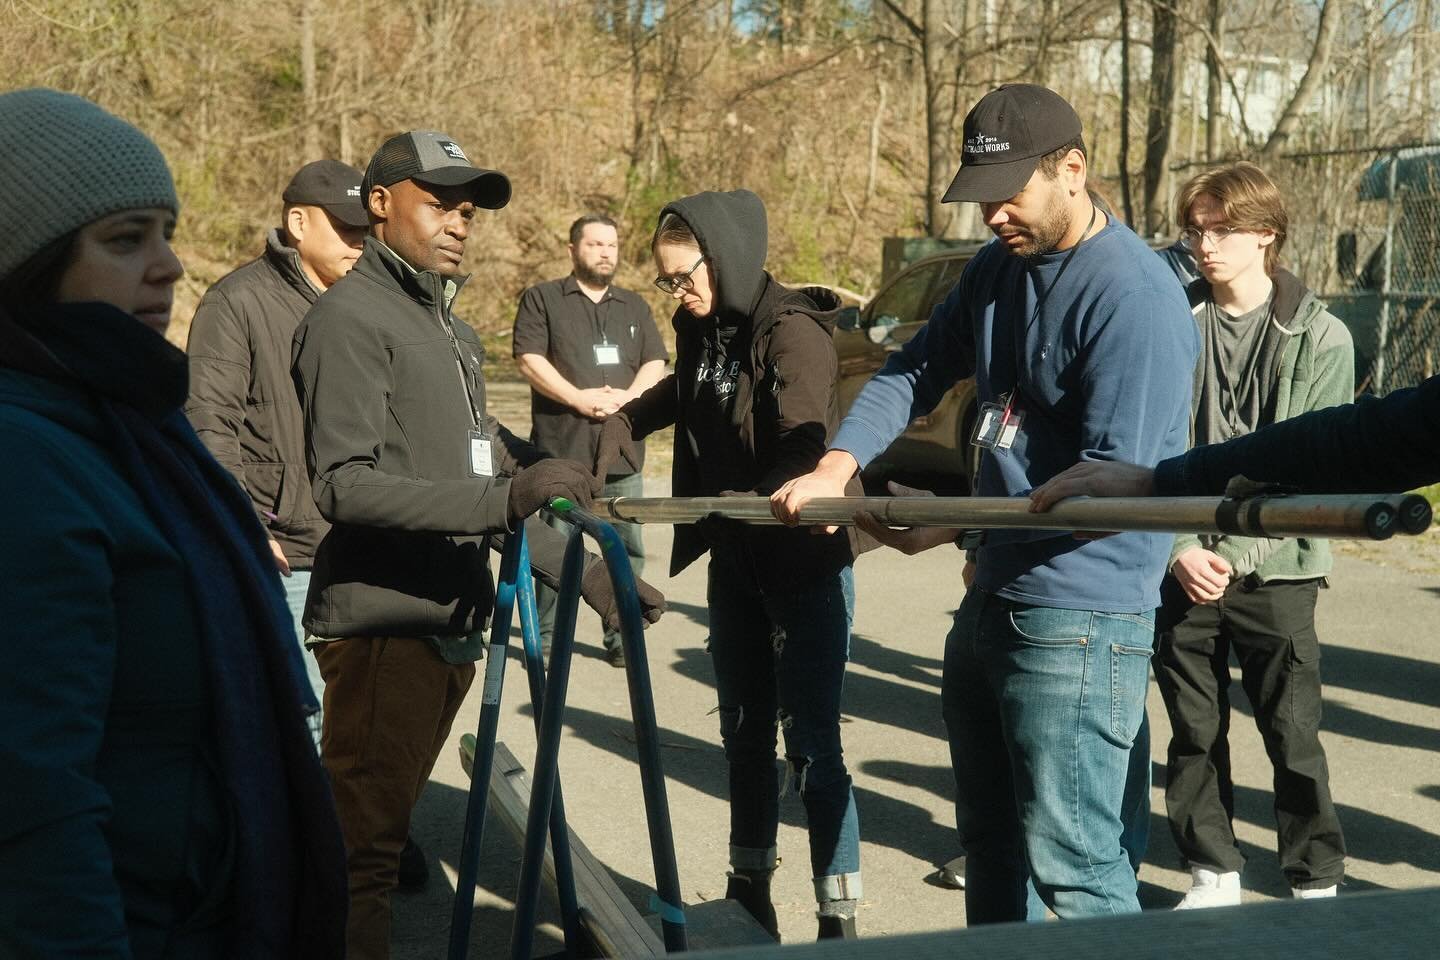 What an incredible 4 days we spent together at Vets on Set!

It was our first ever crew training designed specifically for #HudsonValley veterans, and what an inspiring weekend it was. We are so thankful for our passionate and dedicated working profe